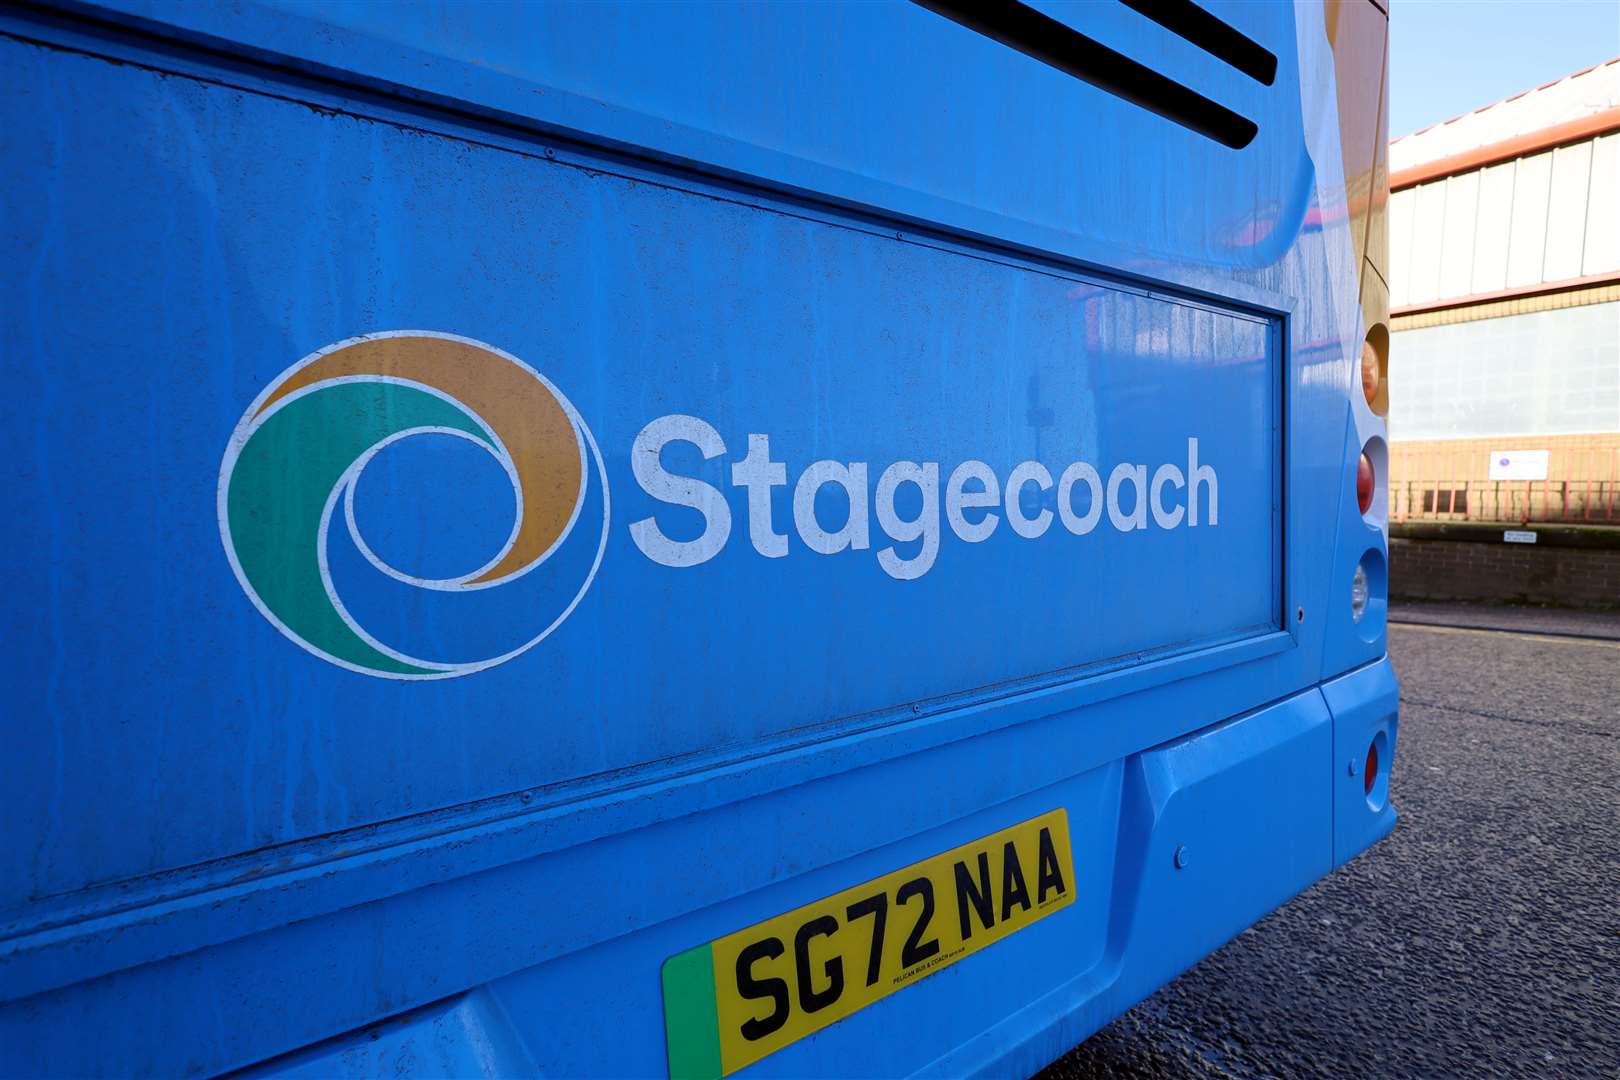 Driver shortages continue to impact Stagecoach services.